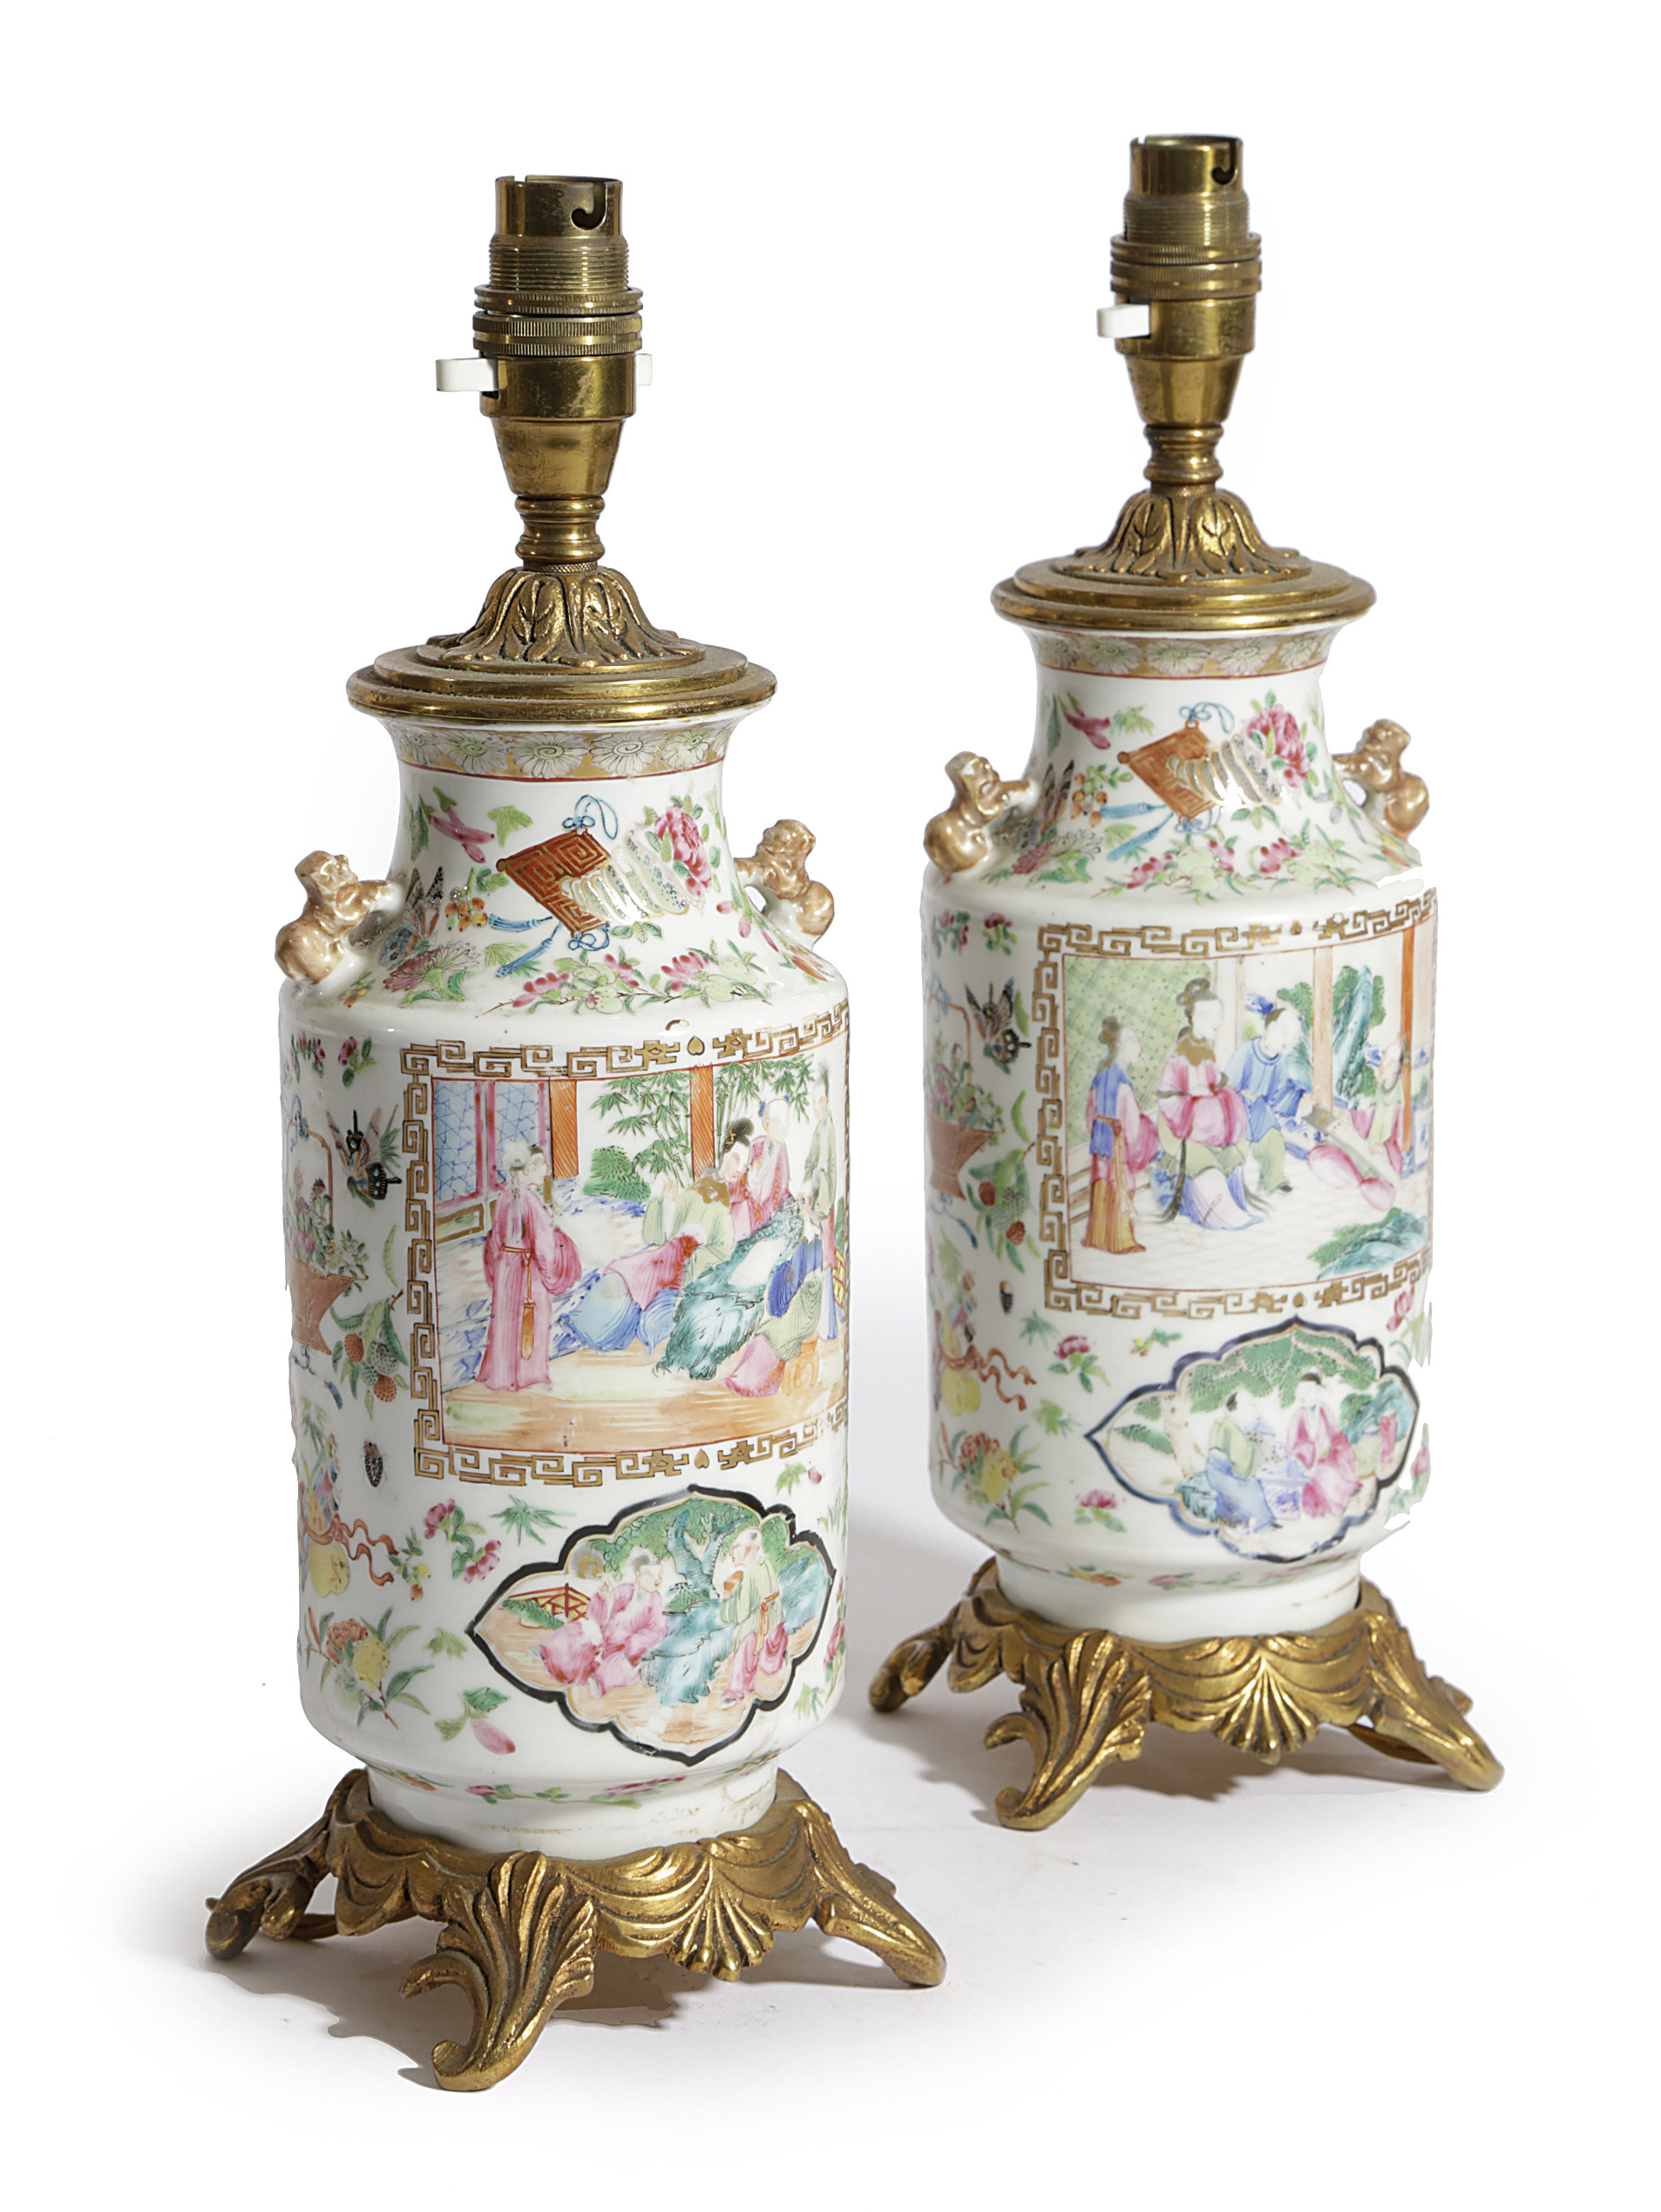 A PAIR OF CHINESE CANTON PORCELAIN FAMILLE ROSE VASE TABLE LAMPS LATE 19TH CENTURY painted with